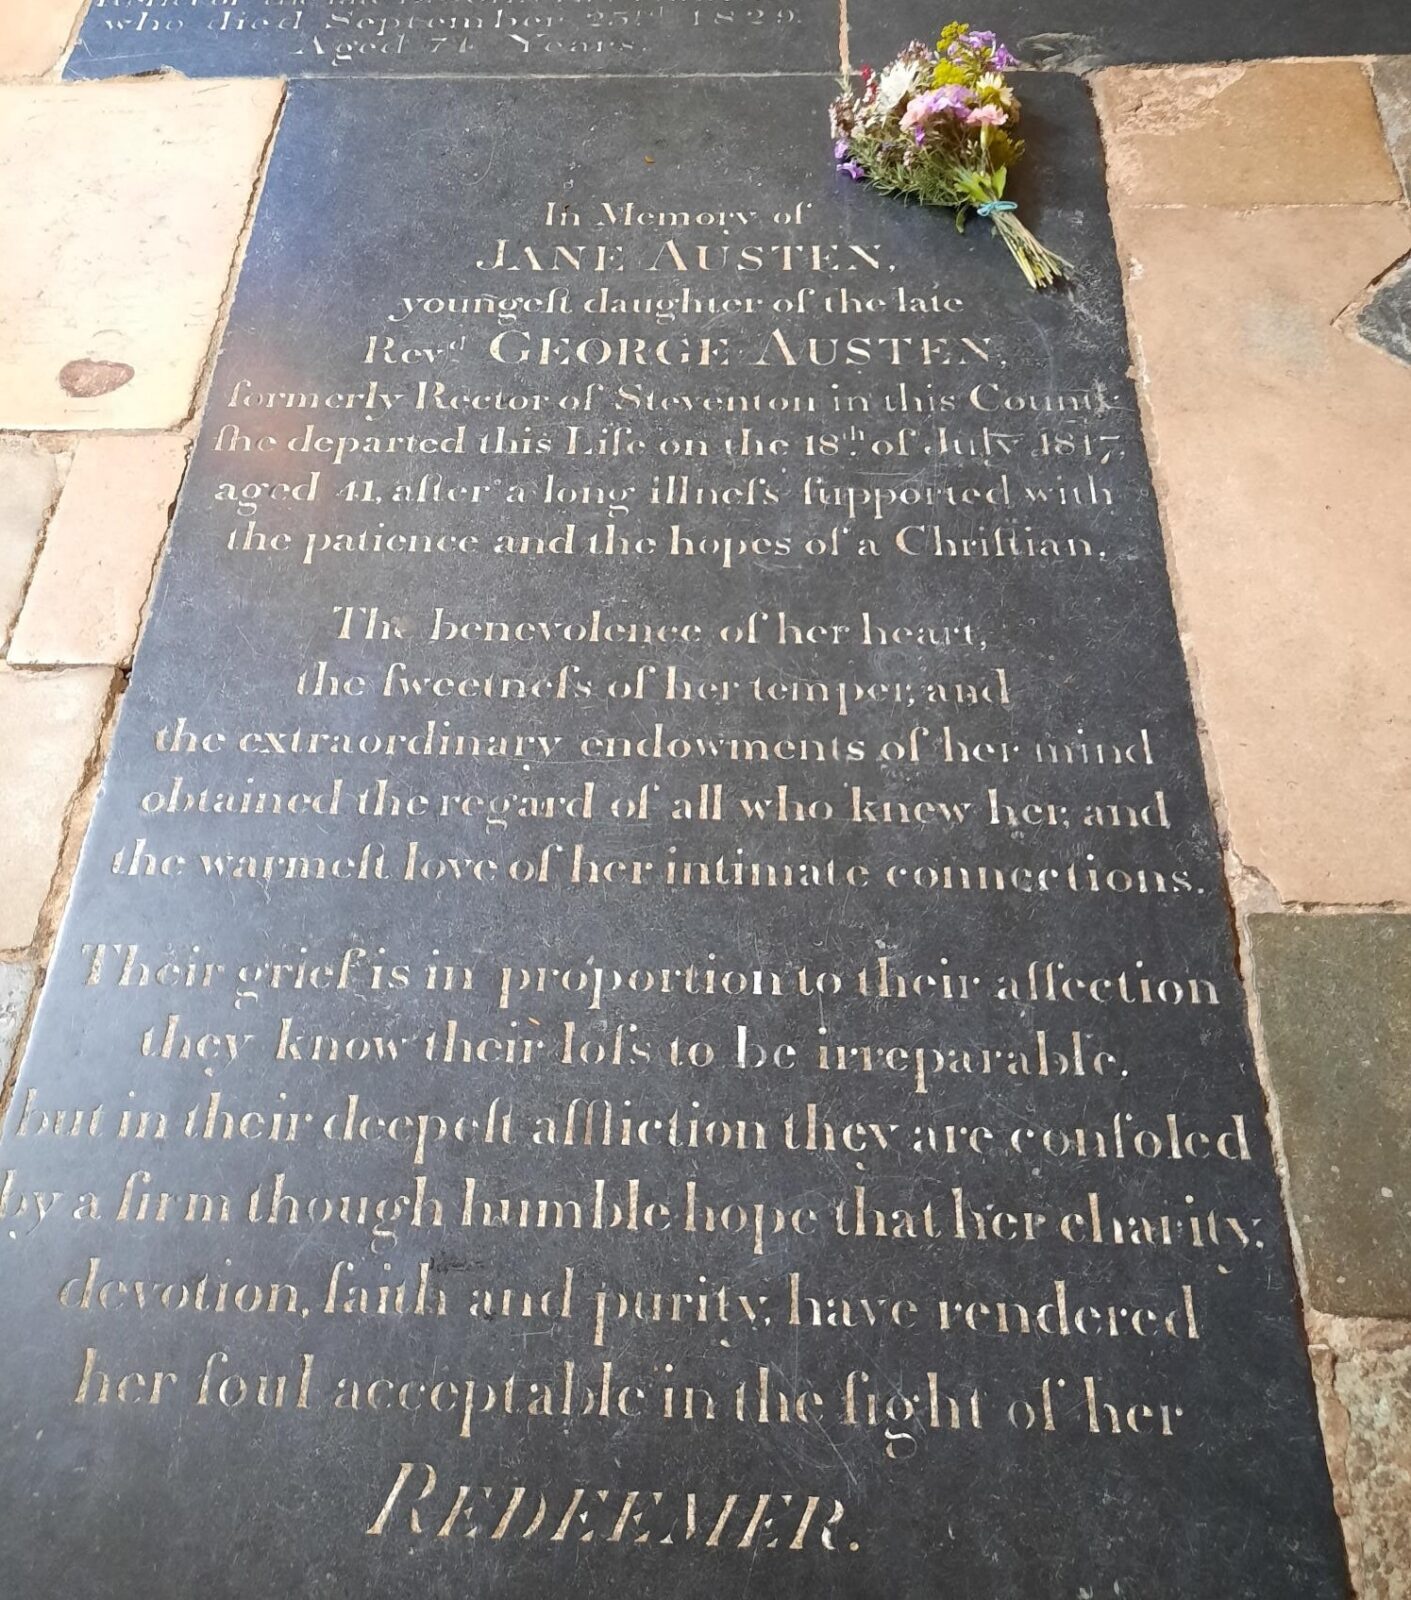 Jane Austen's gravestone in Winchester Cathedral, with a bunch of flowers laid on it